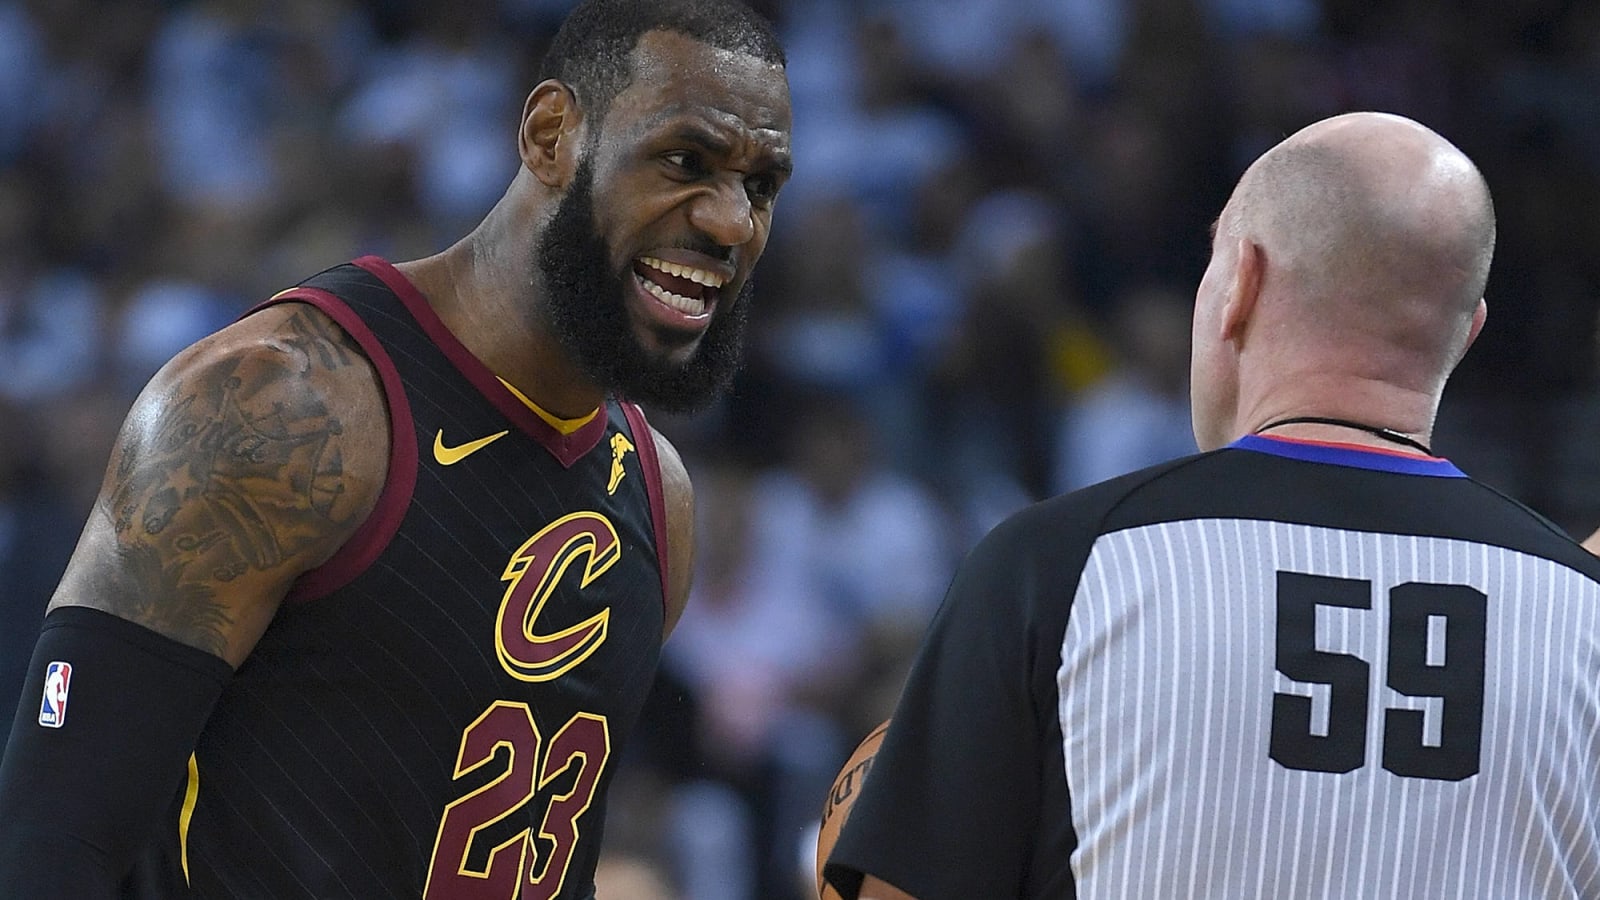 NBA Referee Hotline Bling: LeBron deals with dropped calls